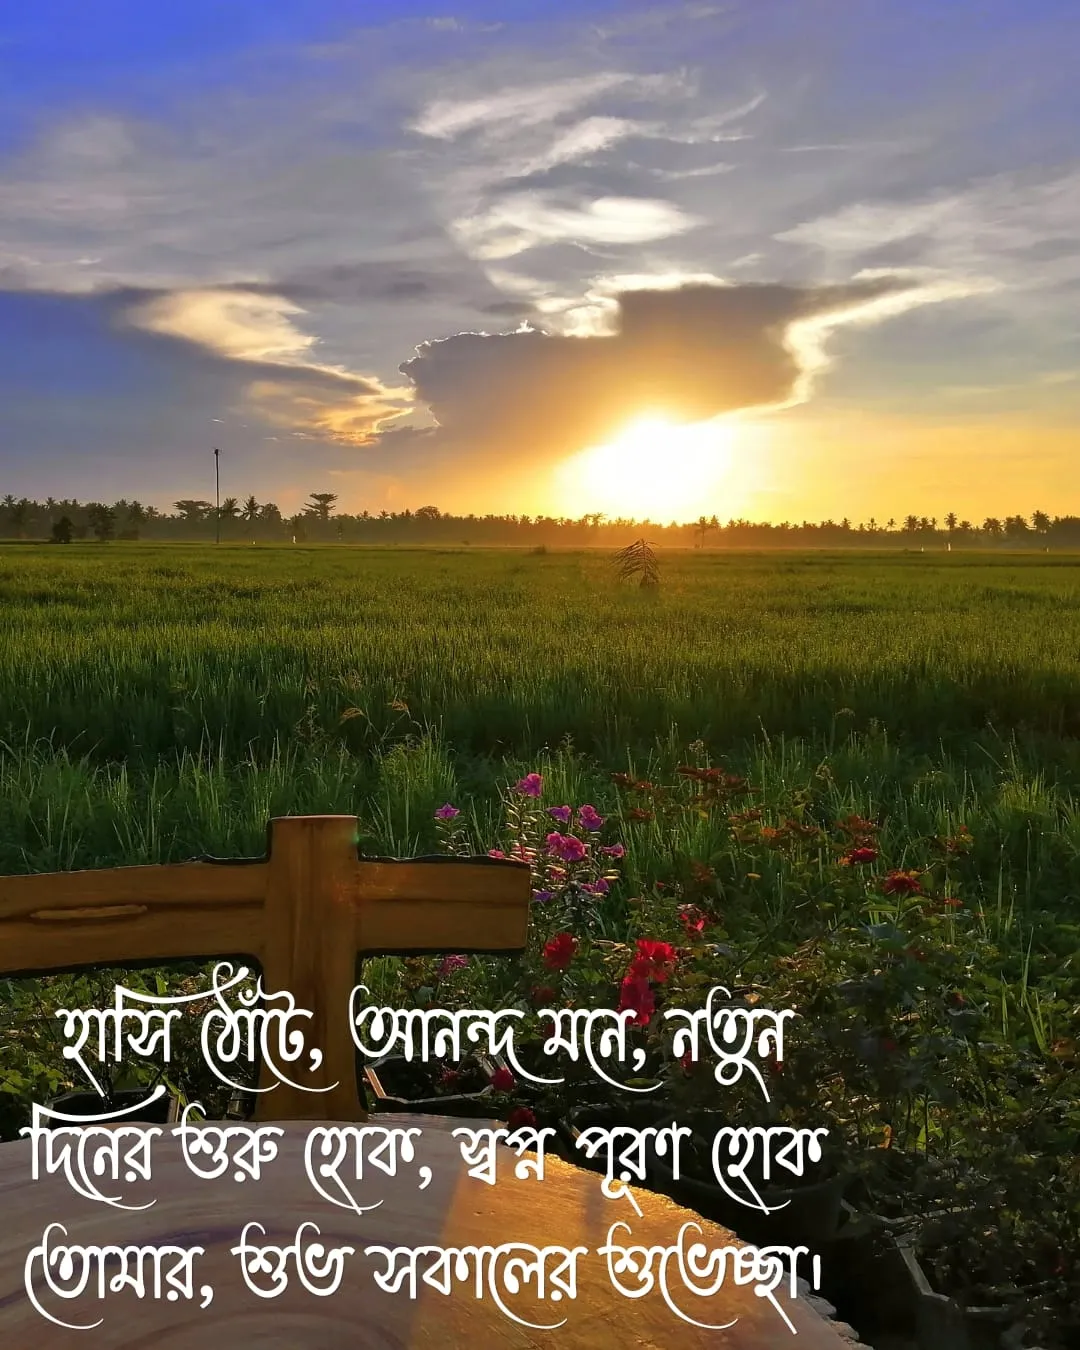 good moring wishes image no.3 in bengali